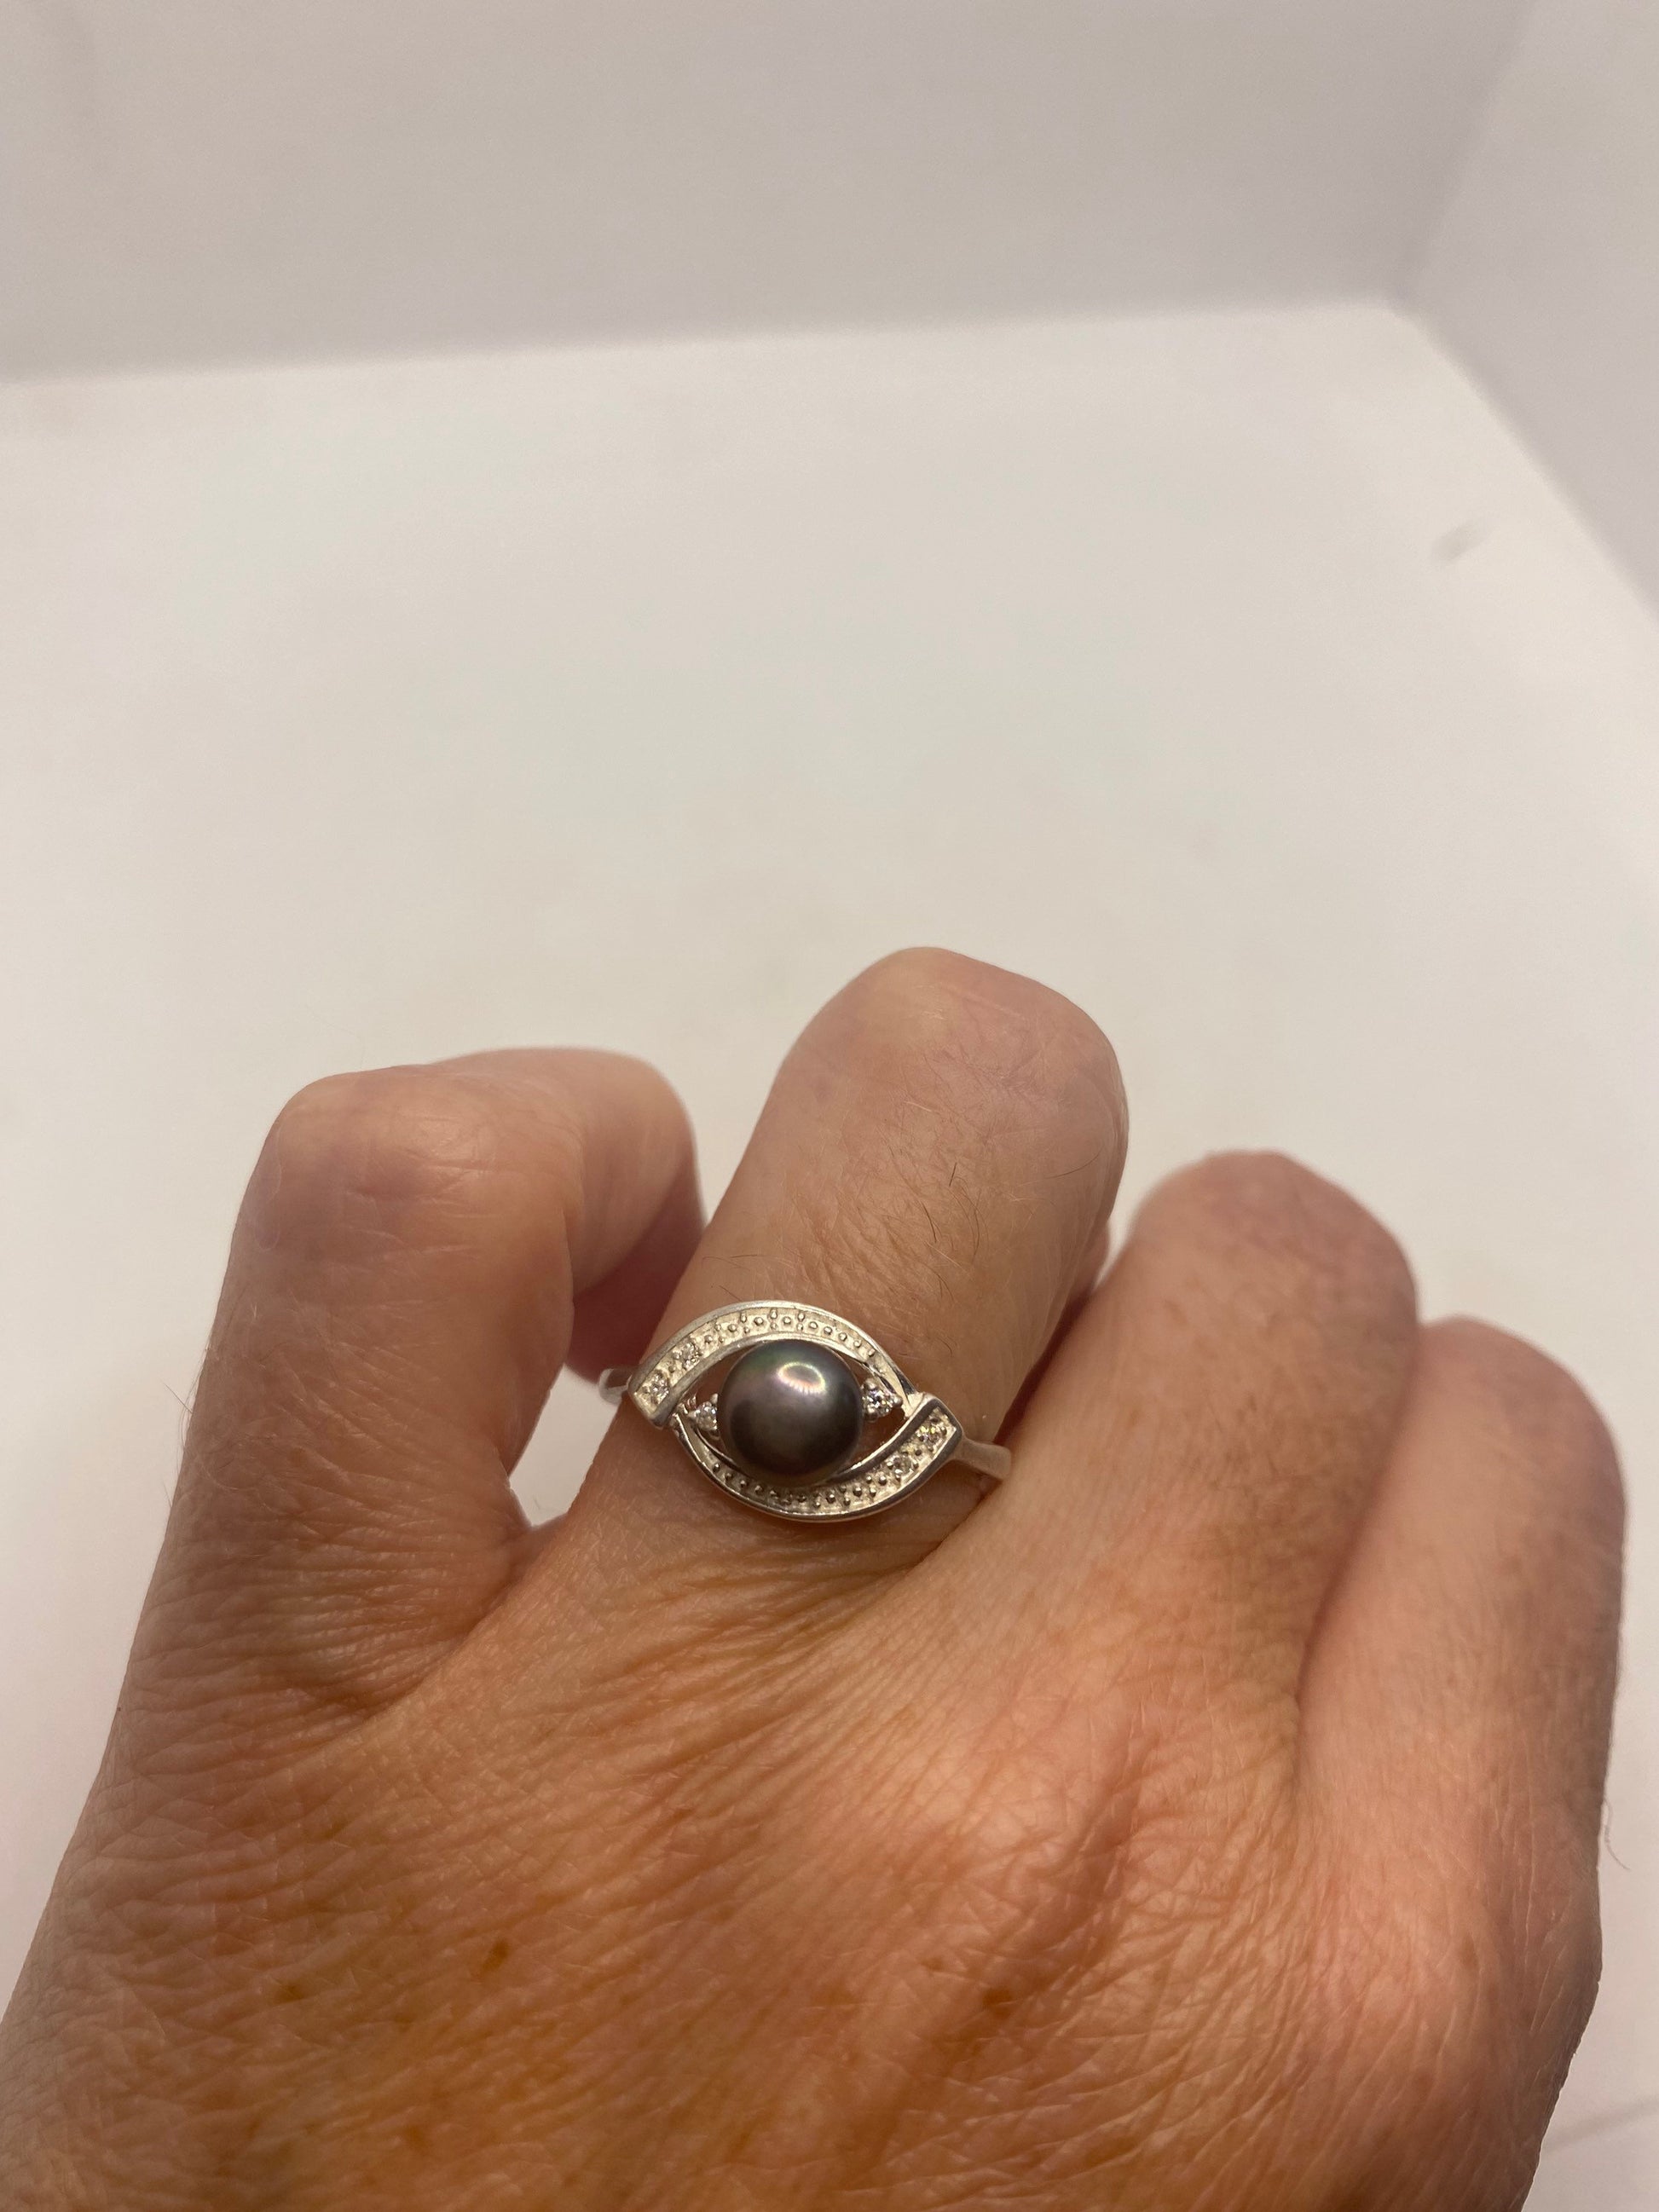 Vintage Black Pearl and Diamond Eye 925 Sterling Silver Cocktail Ring Size 8